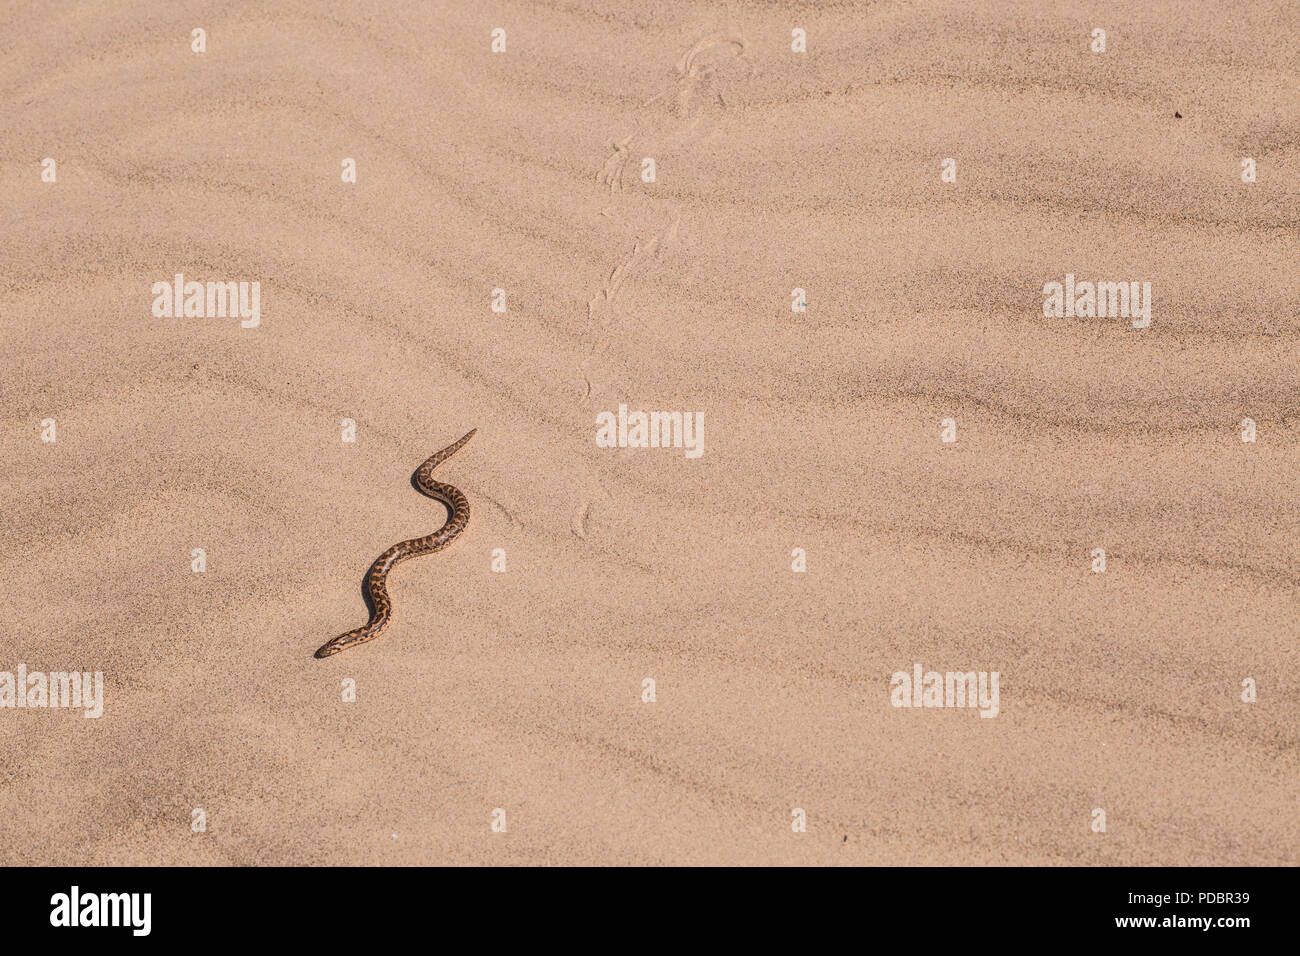 Javelin sand boa (Eryx jaculus) in the sand. This snake is found in Eastern Europe, the Caucasus, the Middle East, and Africa. Photographed in Israel  Stock Photo